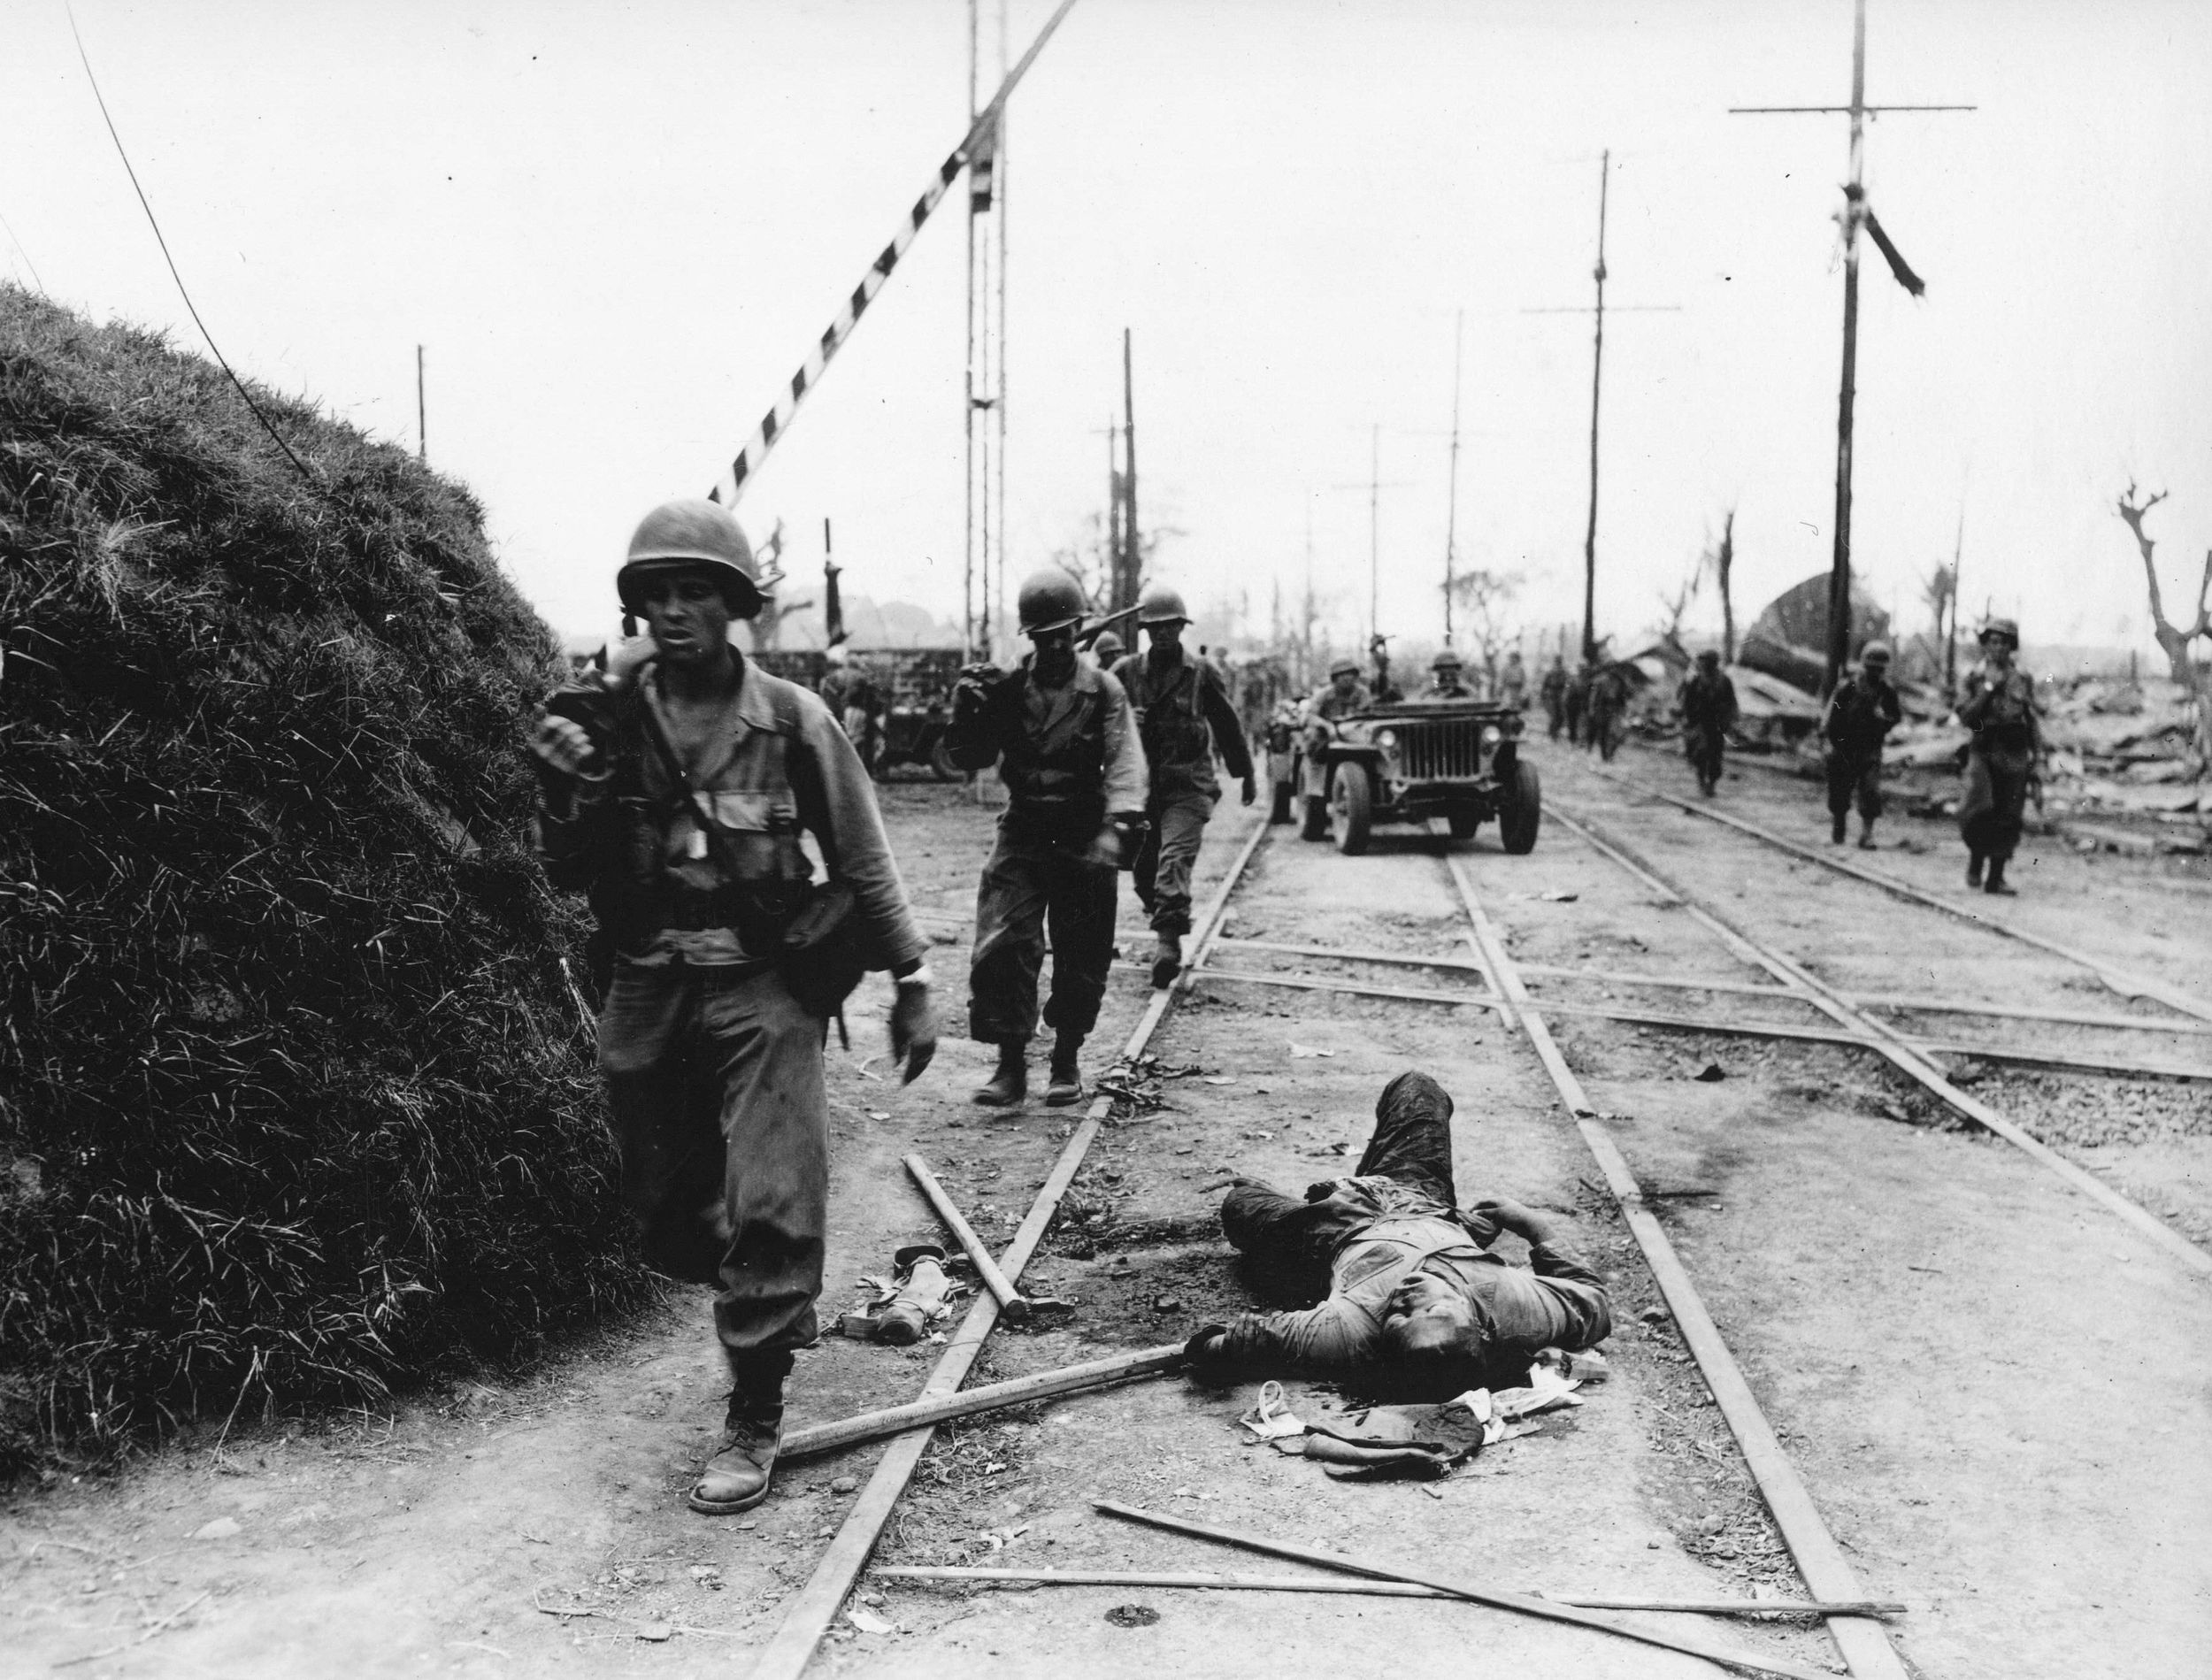 Some fanatical defenders decided to fight to the death in Manila. American soldiers of the 1st Cavalry Division trudge past the bodies of several of the Japanese dead.